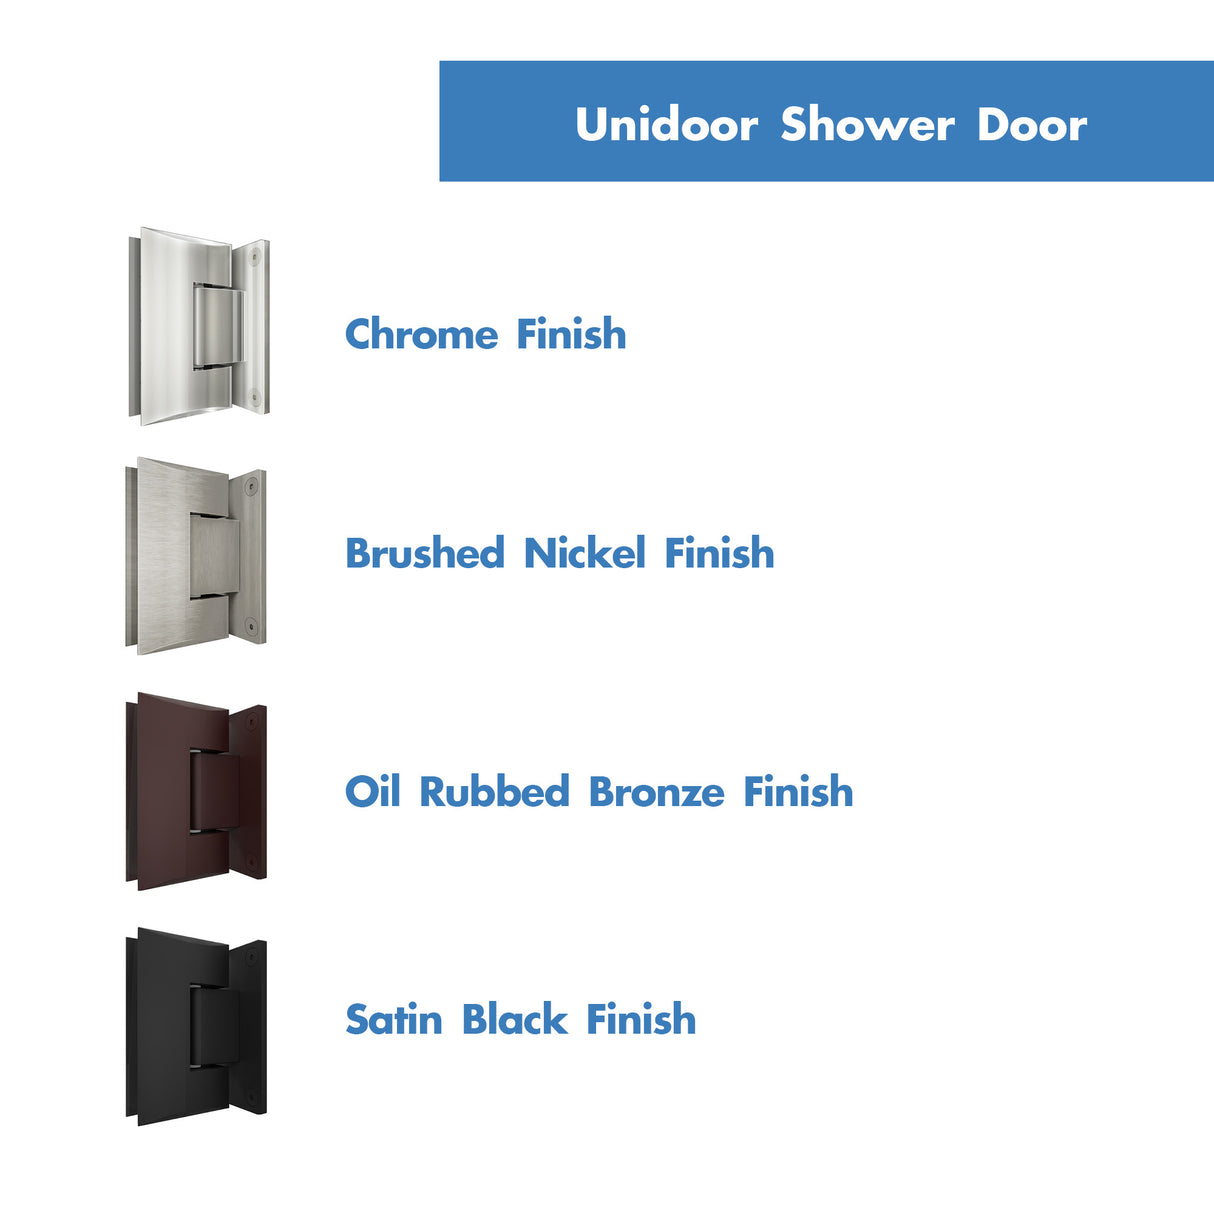 DreamLine Unidoor Plus 41 in. W x 30 3/8 in. D x 72 in. H Frameless Hinged Shower Enclosure in Chrome